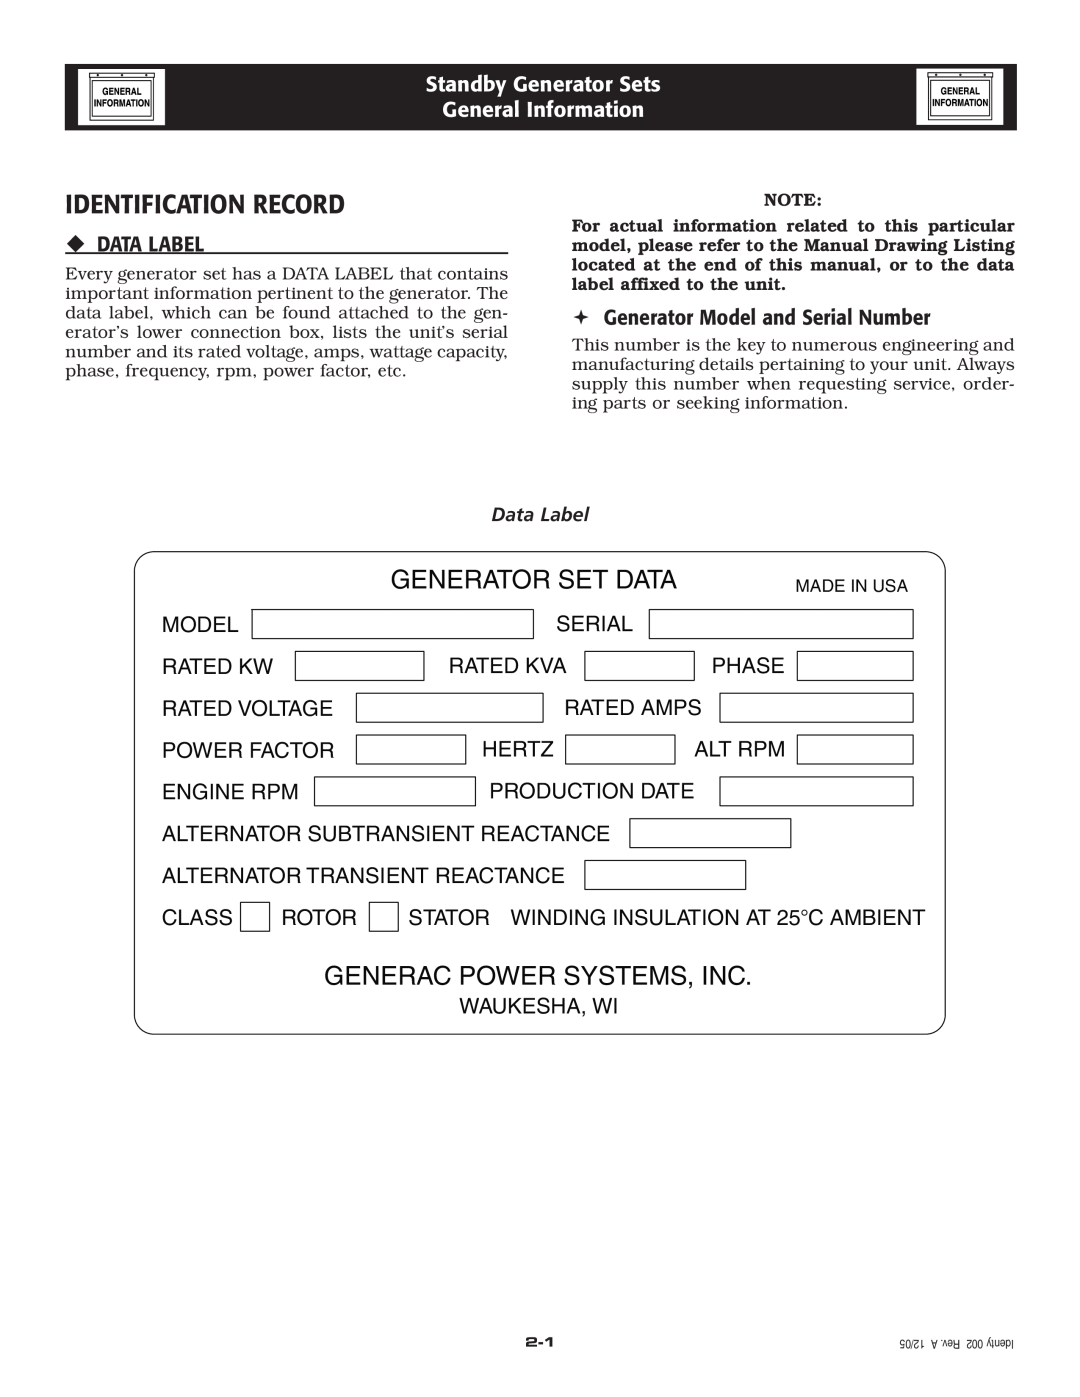 Generac Power Systems 005219-0 owner manual Identification Record, Standby Generator Sets General Information, ‹ Data Label 